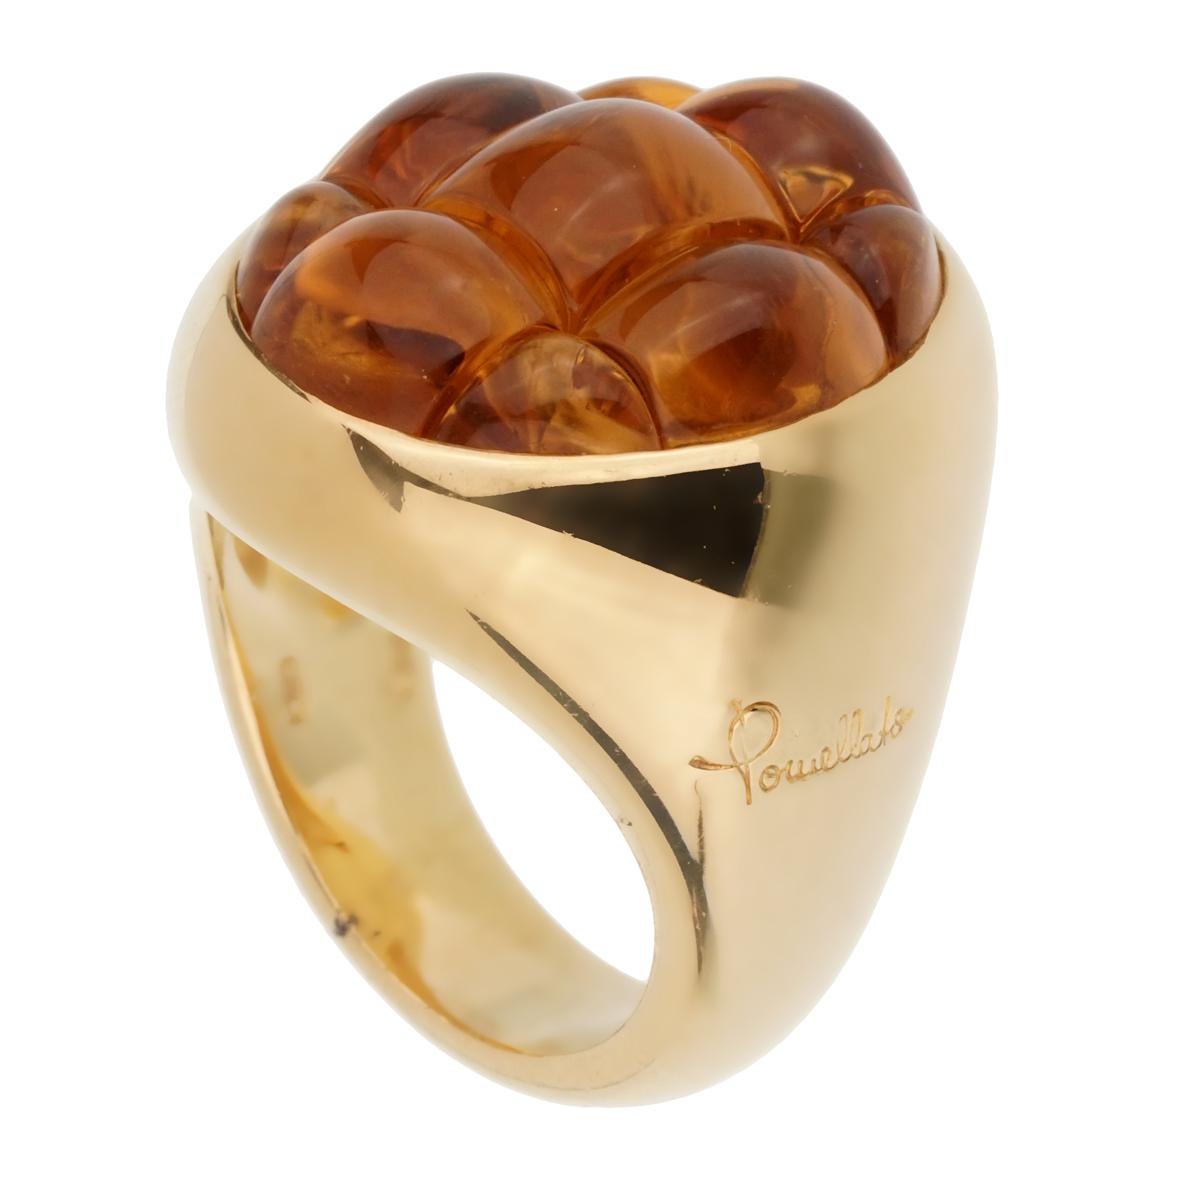 A fabulous brand new Pomellato ring showcasing a 16ct citrine set in shimmering 18k yellow gold. The ring measures a size 7.25 and can be resized.

Retail Price: $9000
Sku: 2329